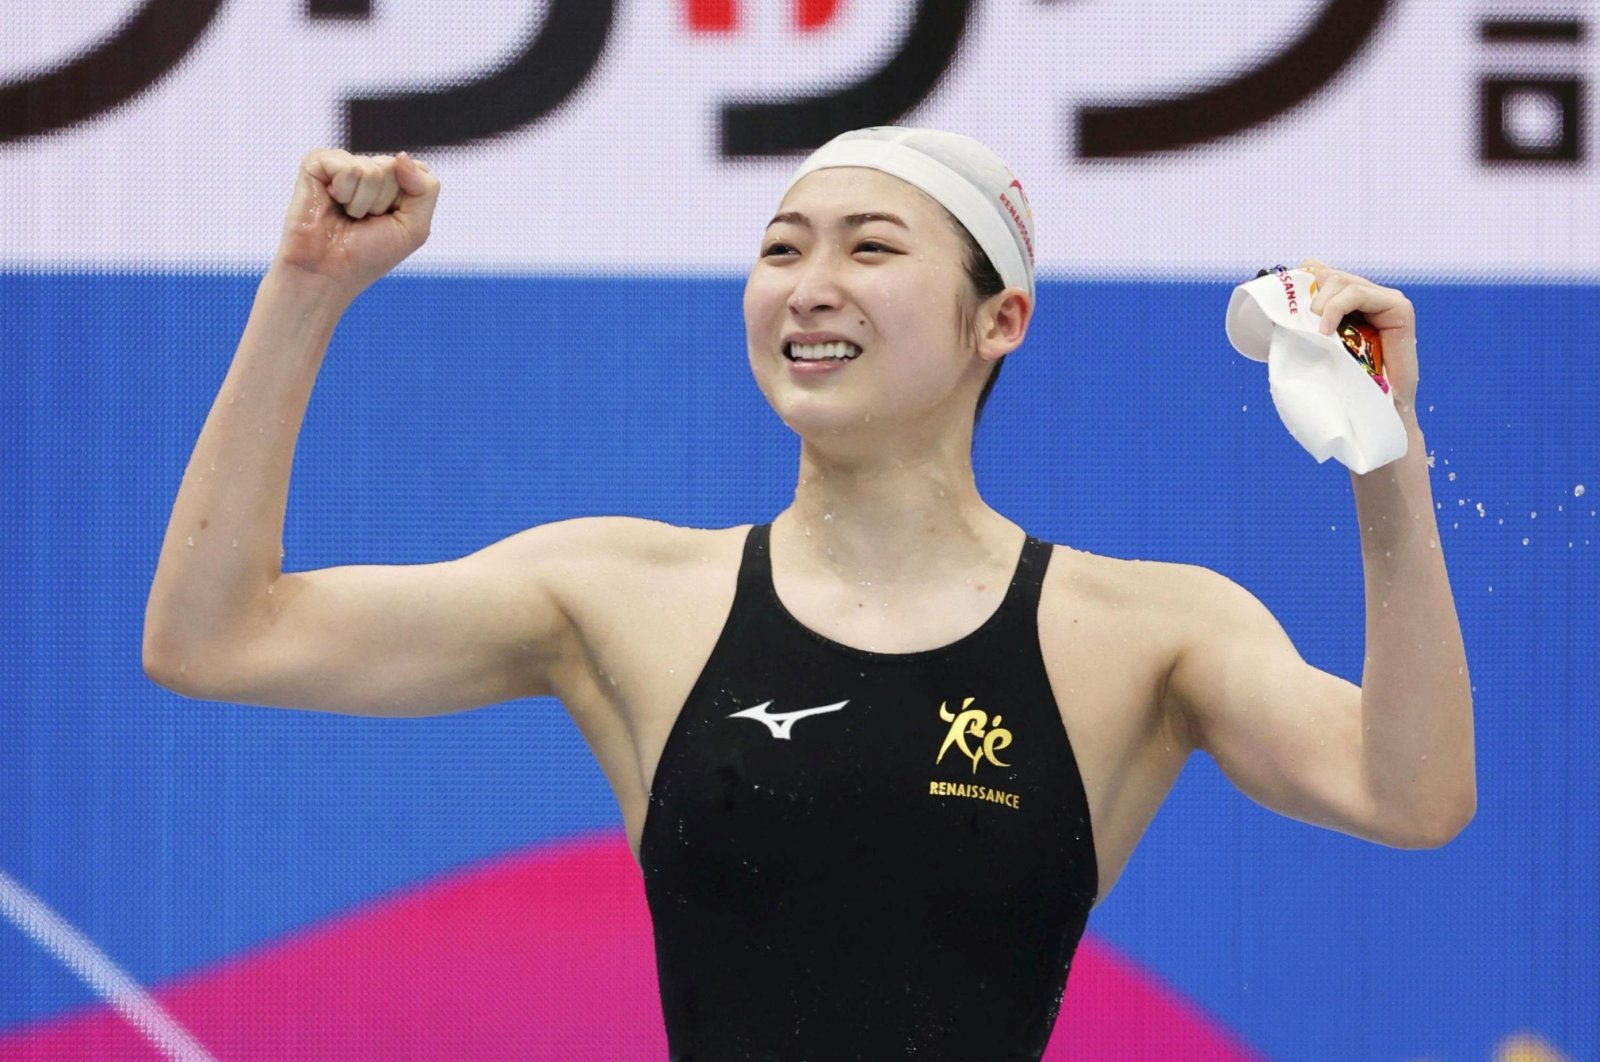 Japan's Rikako Ikee reacts after winning the women's 100-meter butterfly final at the national swimming championships at Tokyo Aquatics Centre in Tokyo, Japan, April 4, 2021 (Reuters Photo)